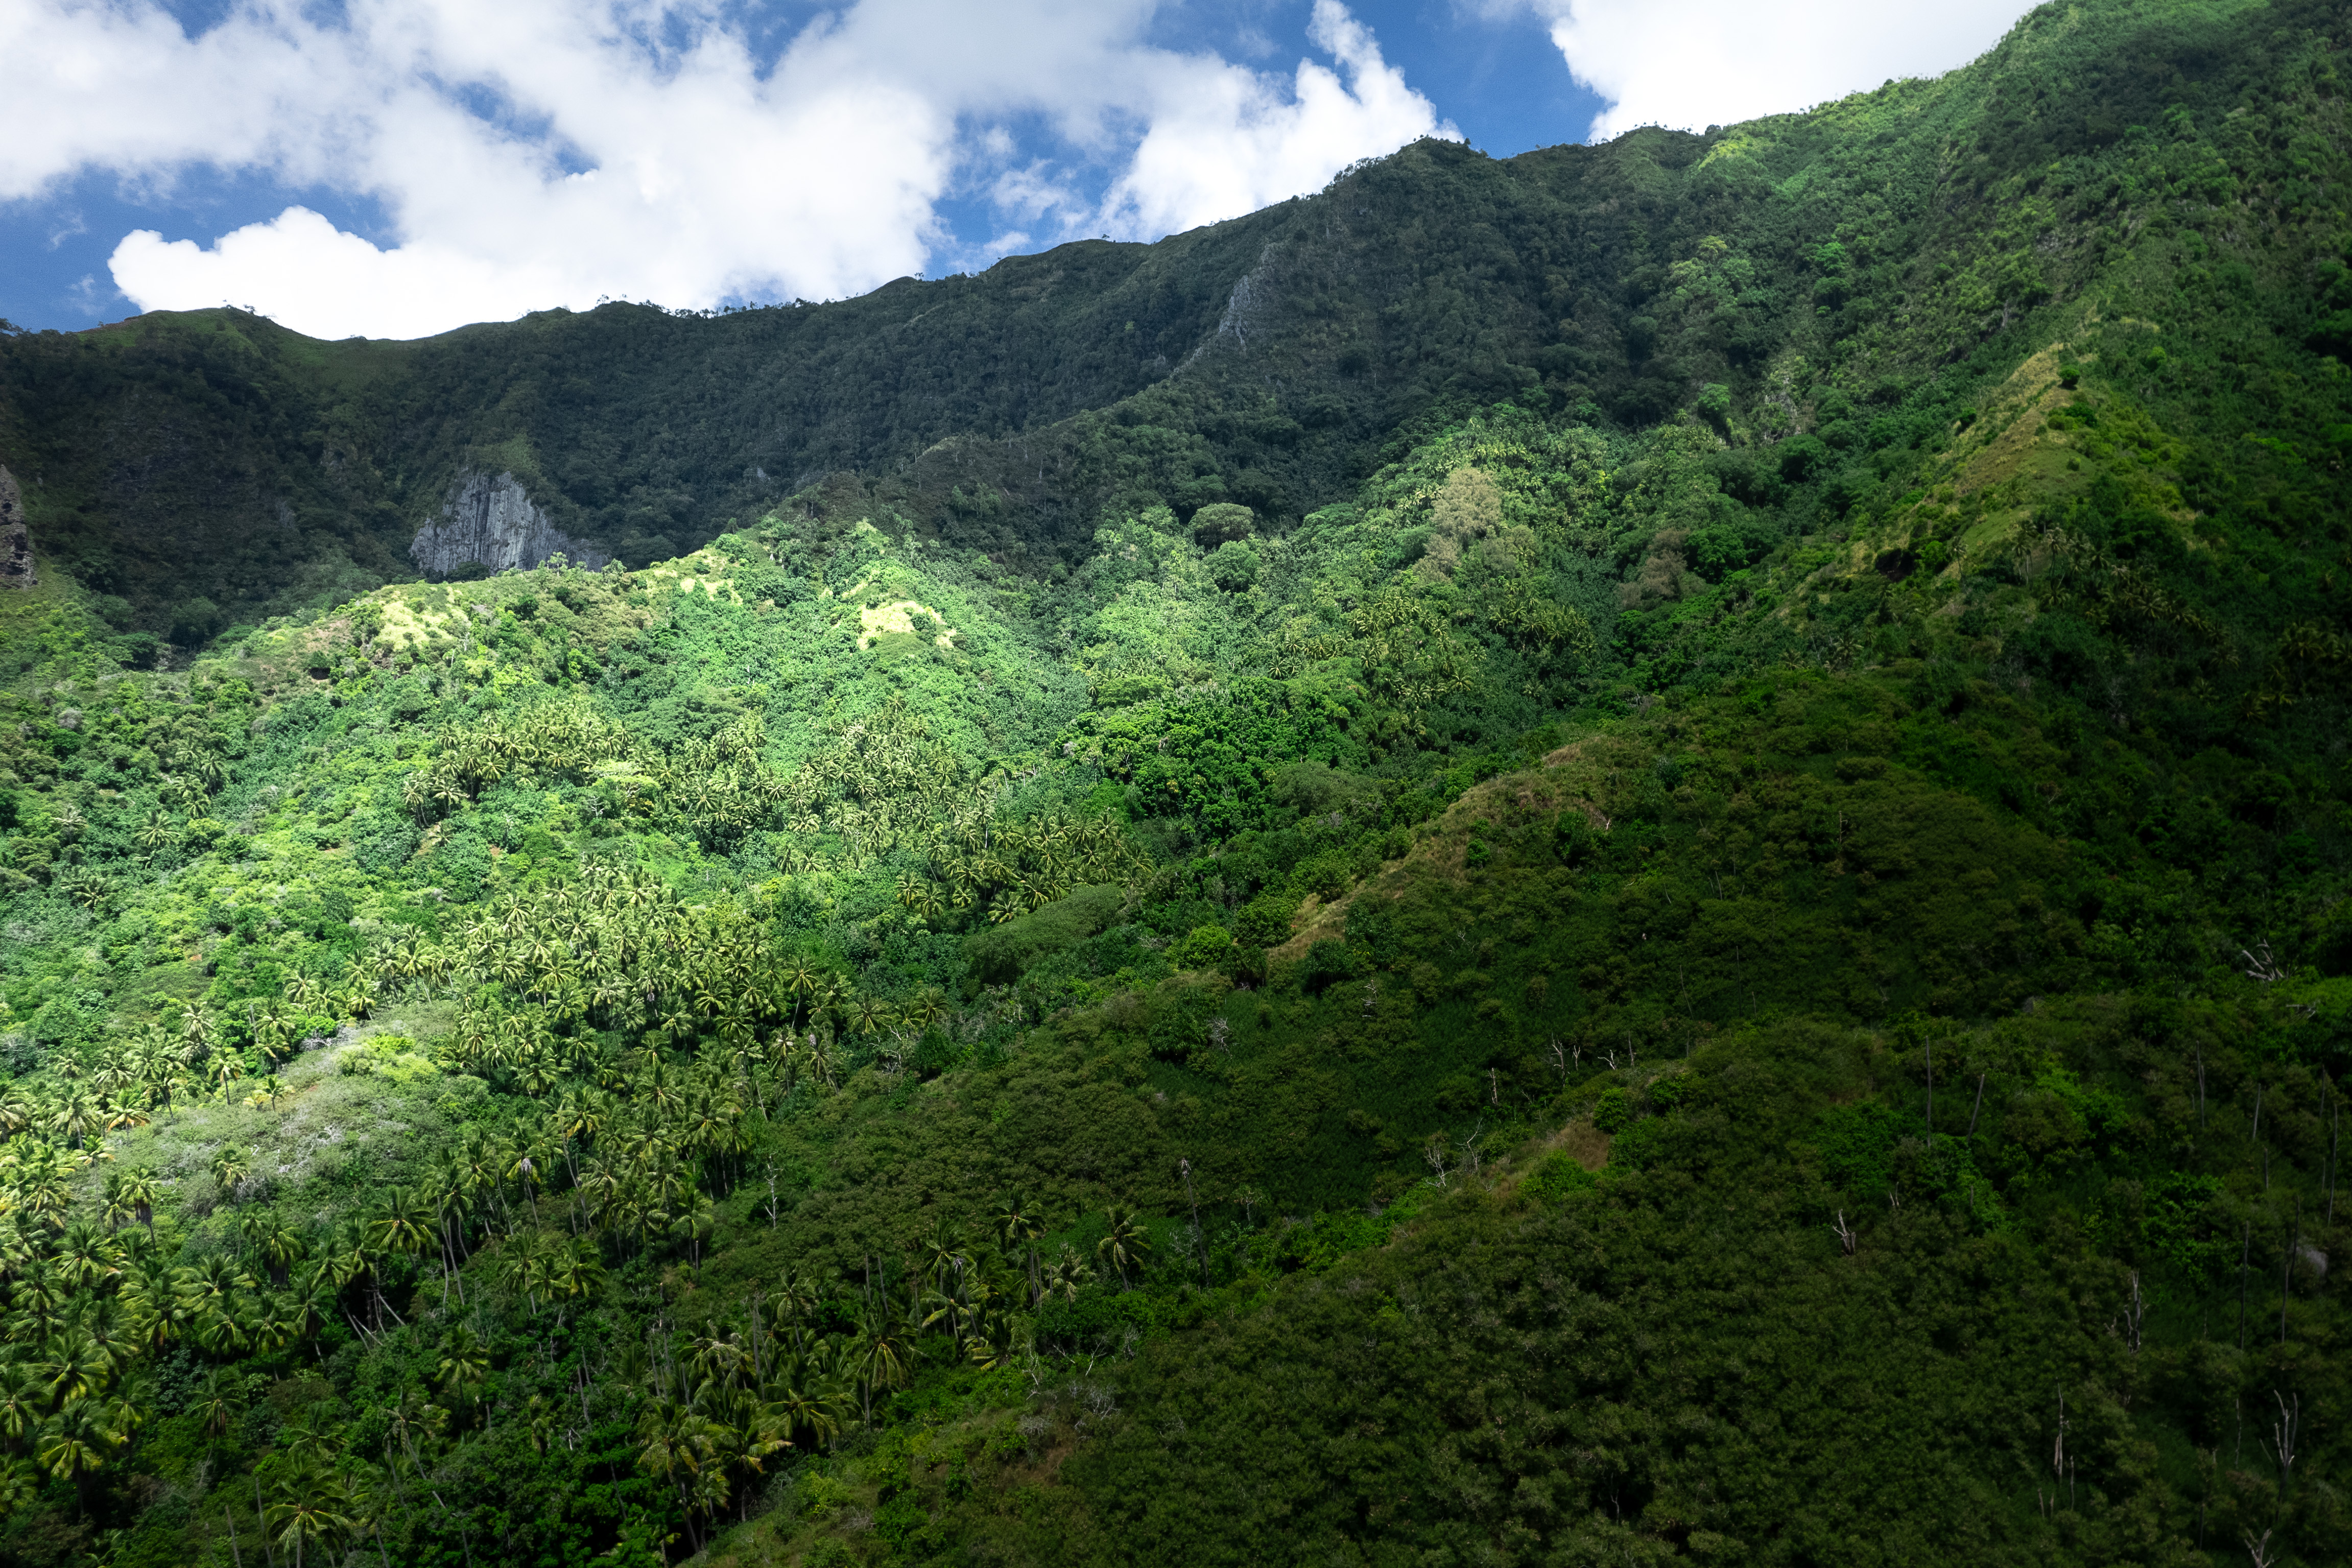 HIVA OA - ATUONA Unique Land stretching from the sea to the mountains